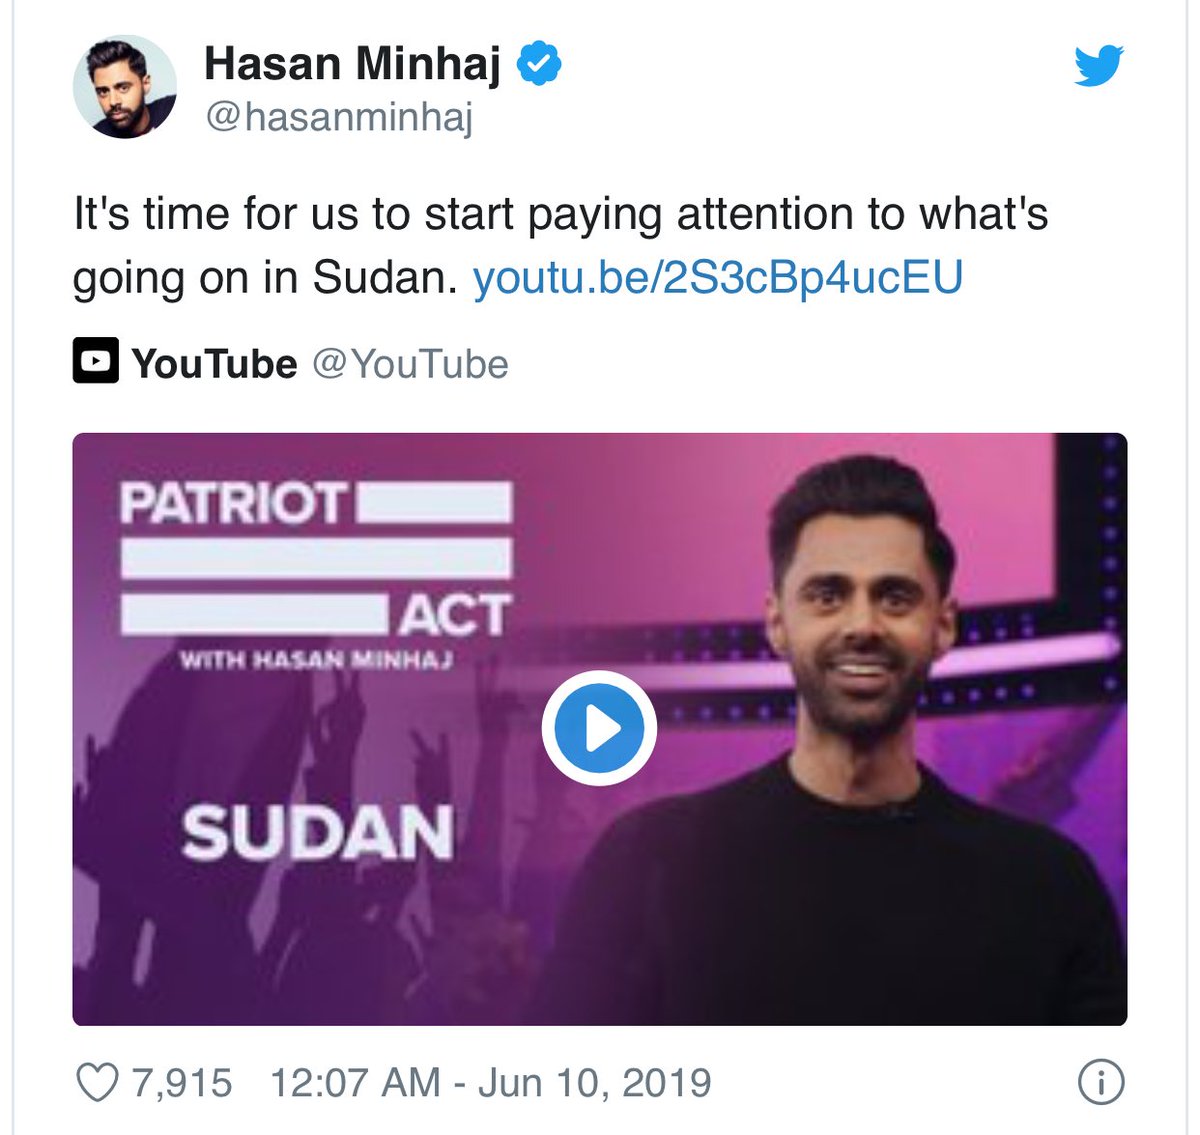 6.When Hassan Minhaj and Trevor Noah talked about the Sudanese revolution on their shows